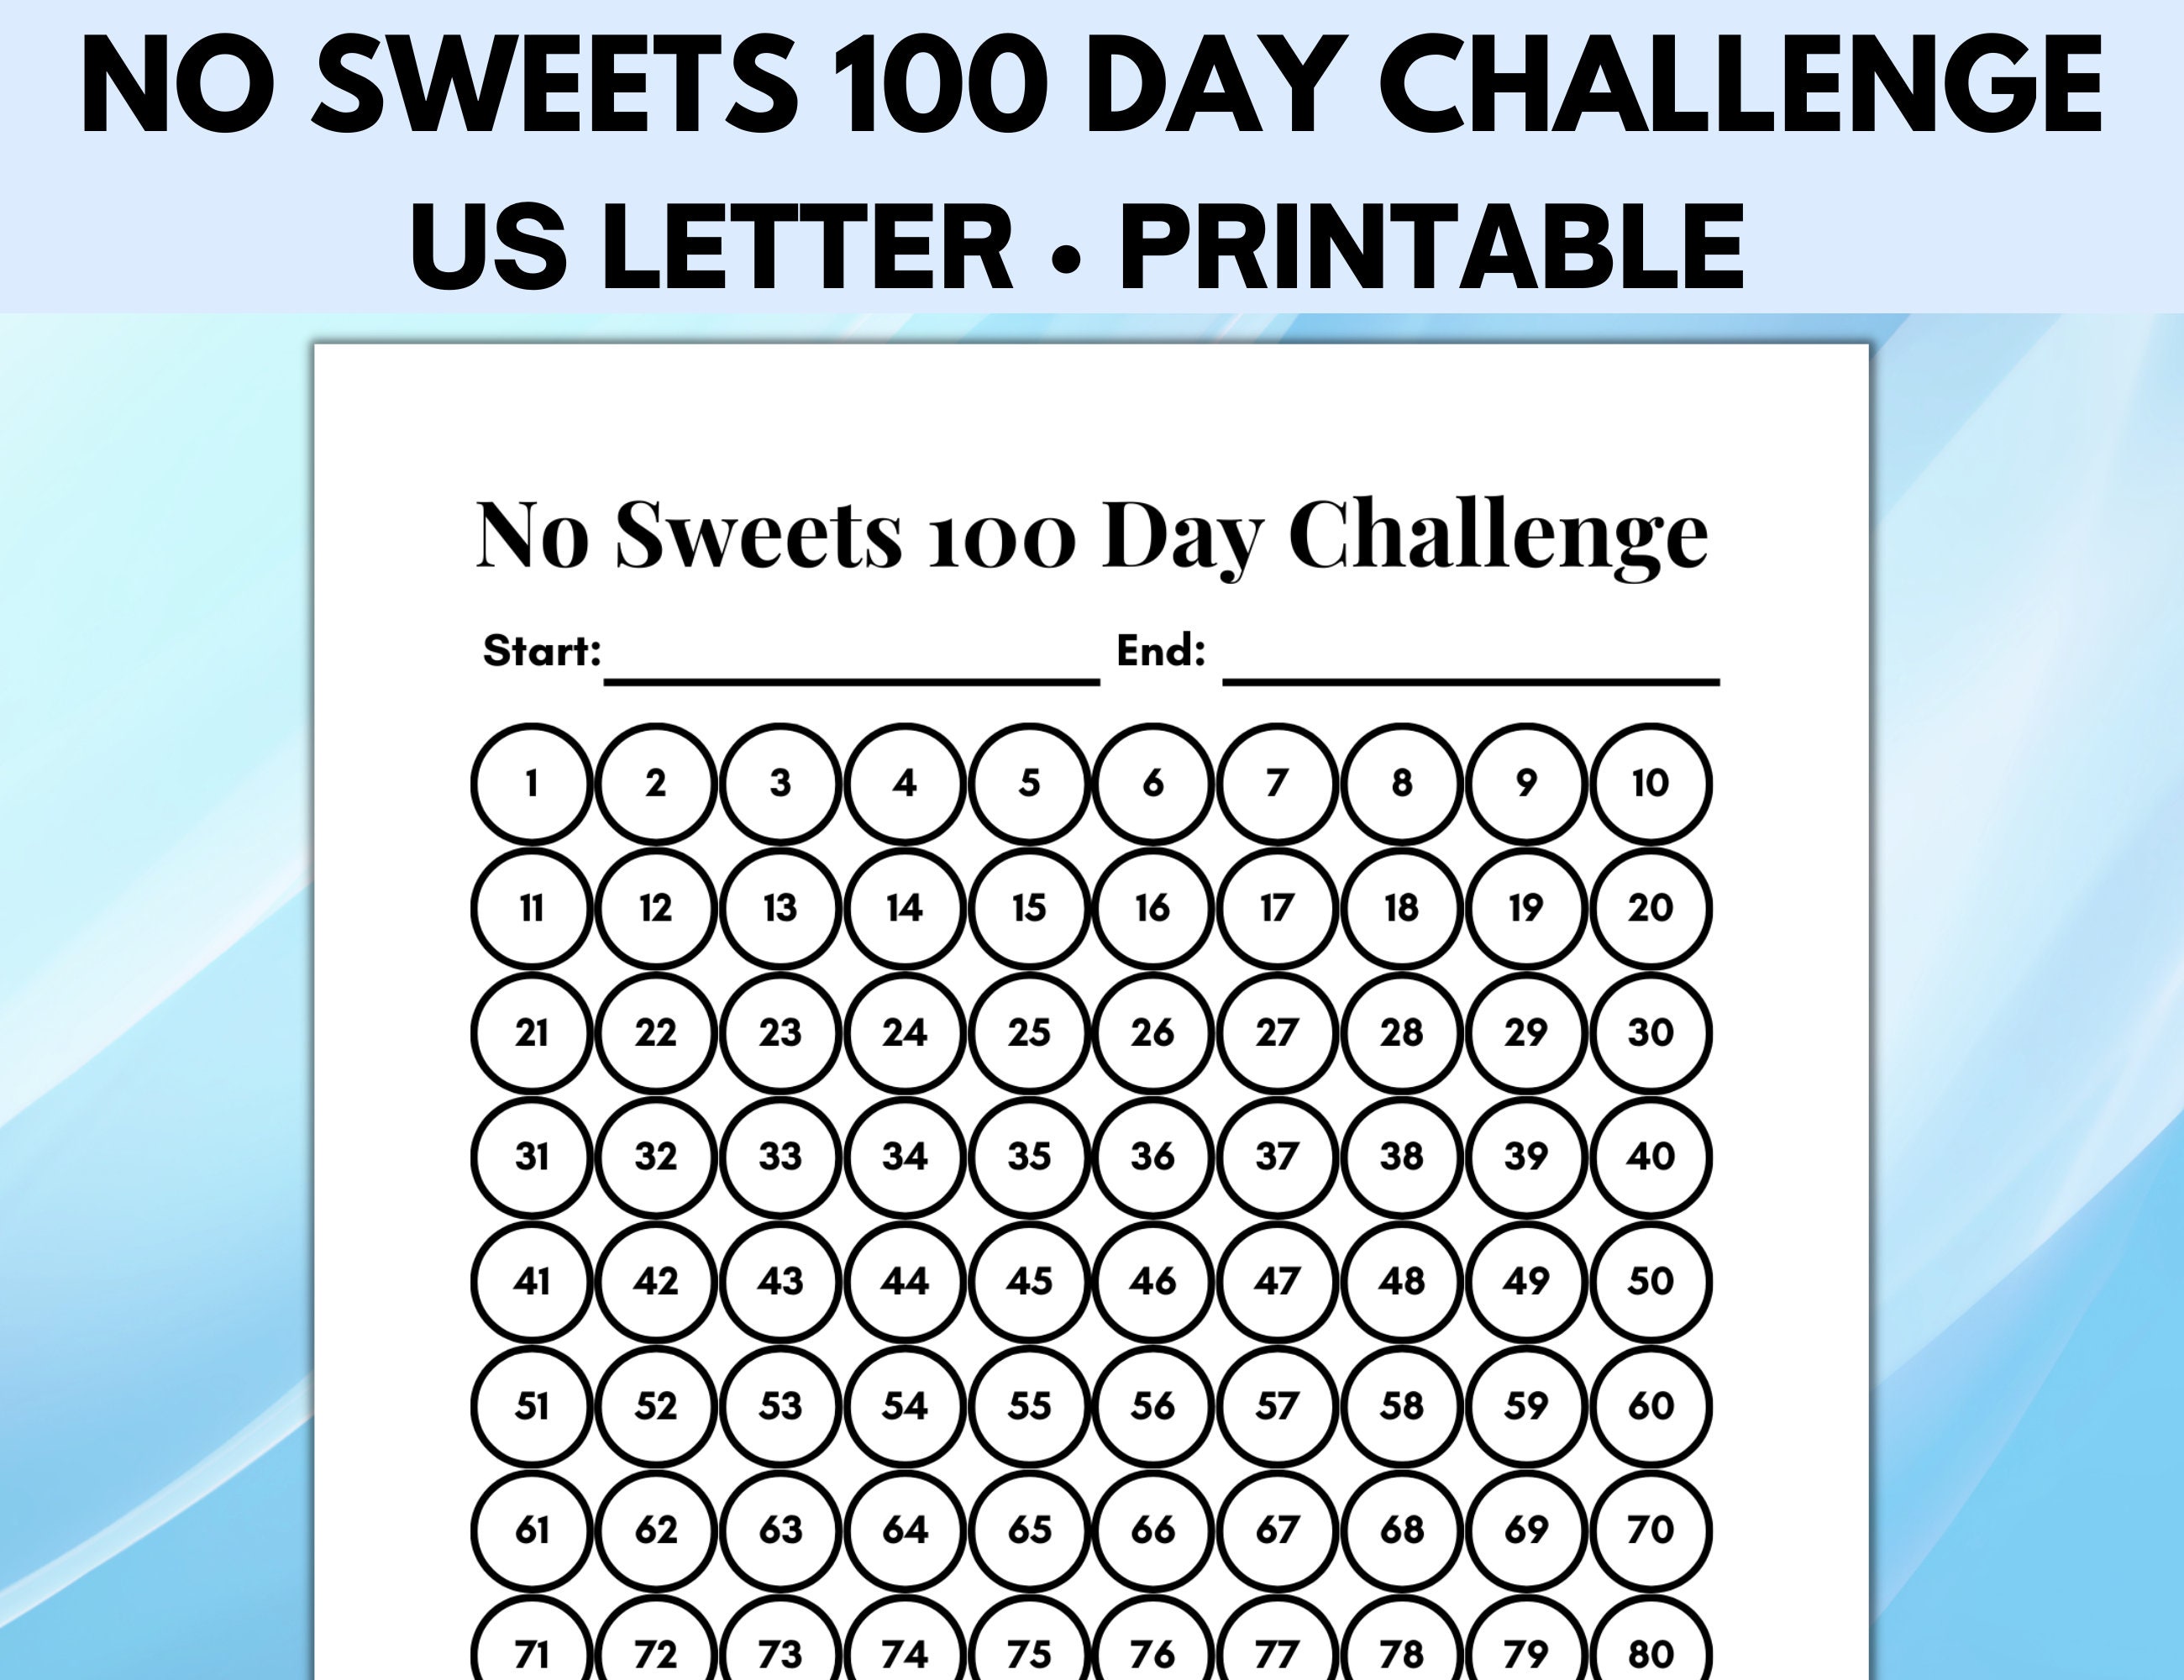 Have You Taken the Canderel Sugarly Challenge?